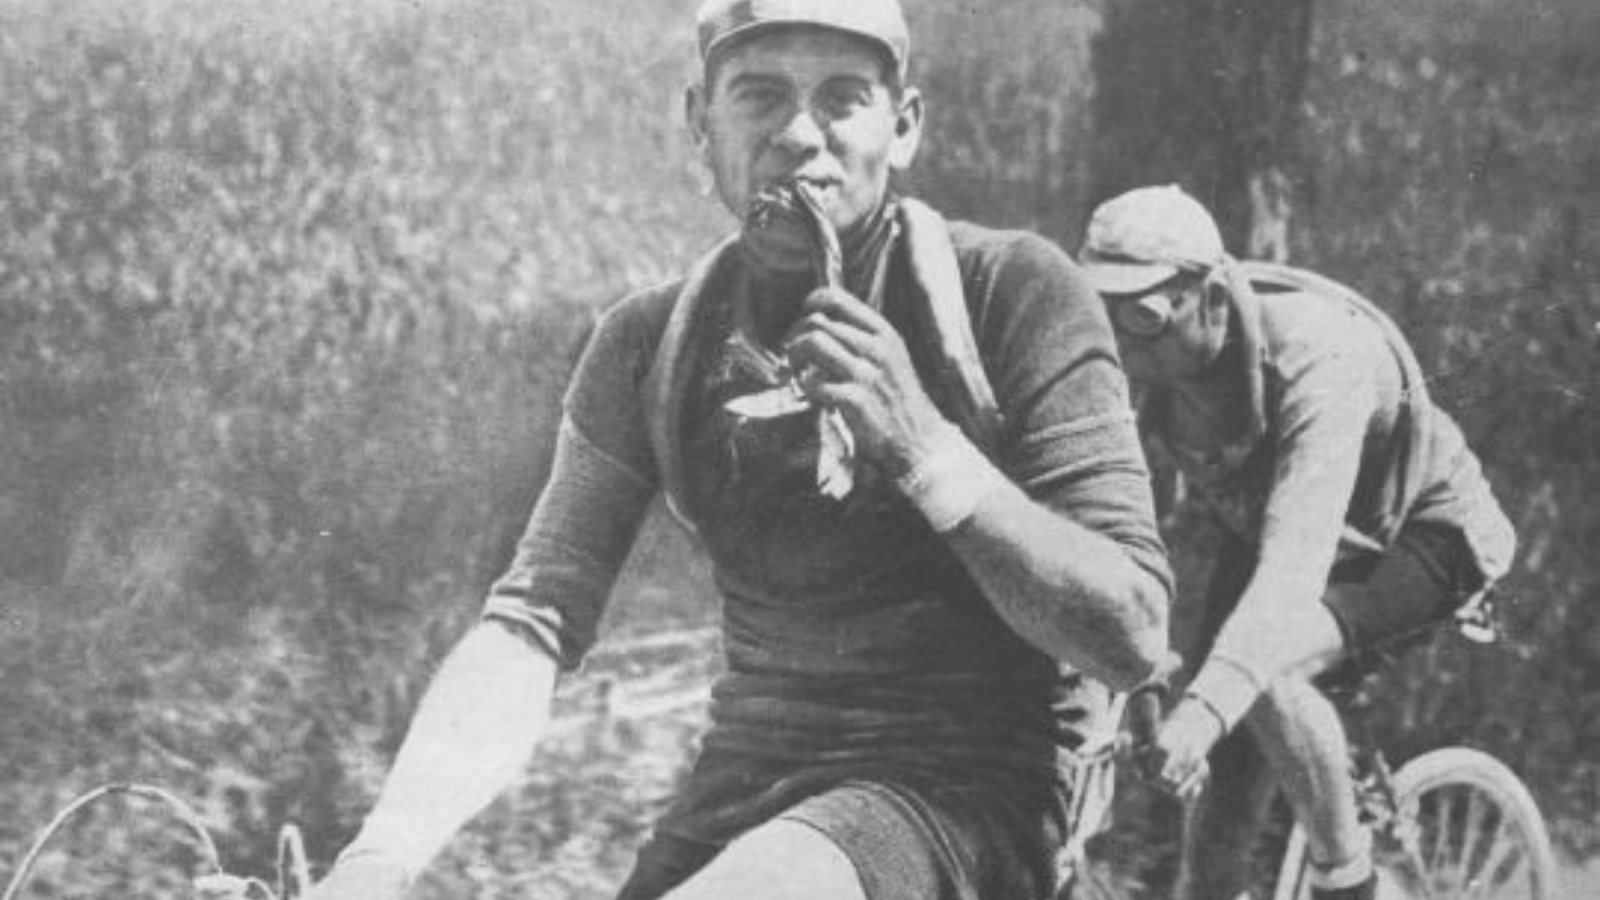 Cyclists from the 1920s Gustaaf van Slembrouck